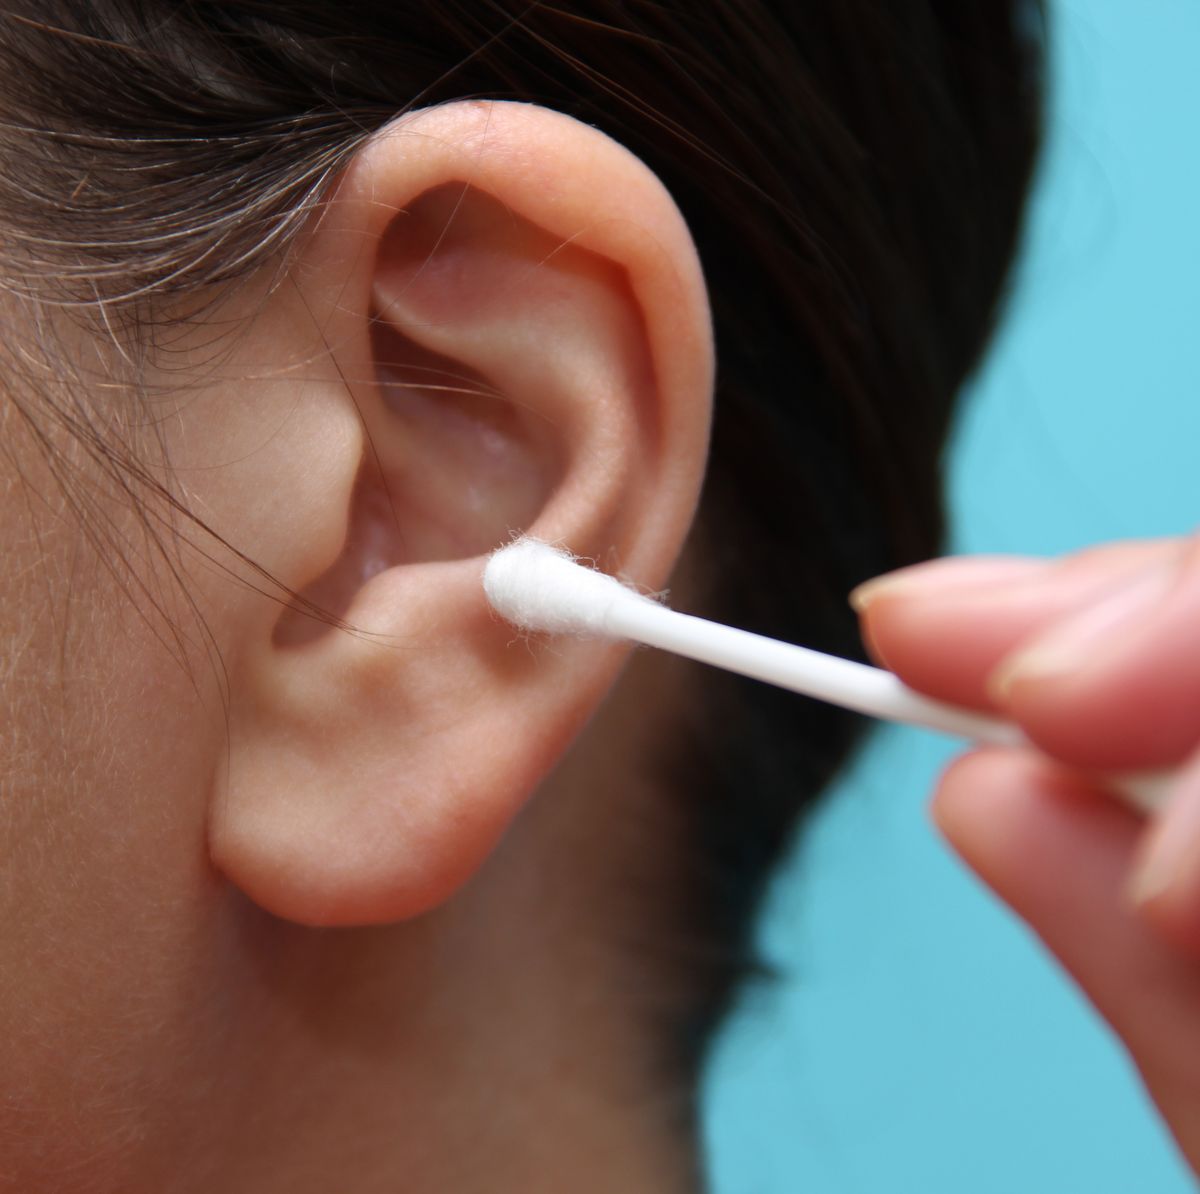 Ear Acne: How to Get Rid of a Pimple Inside Your Ear